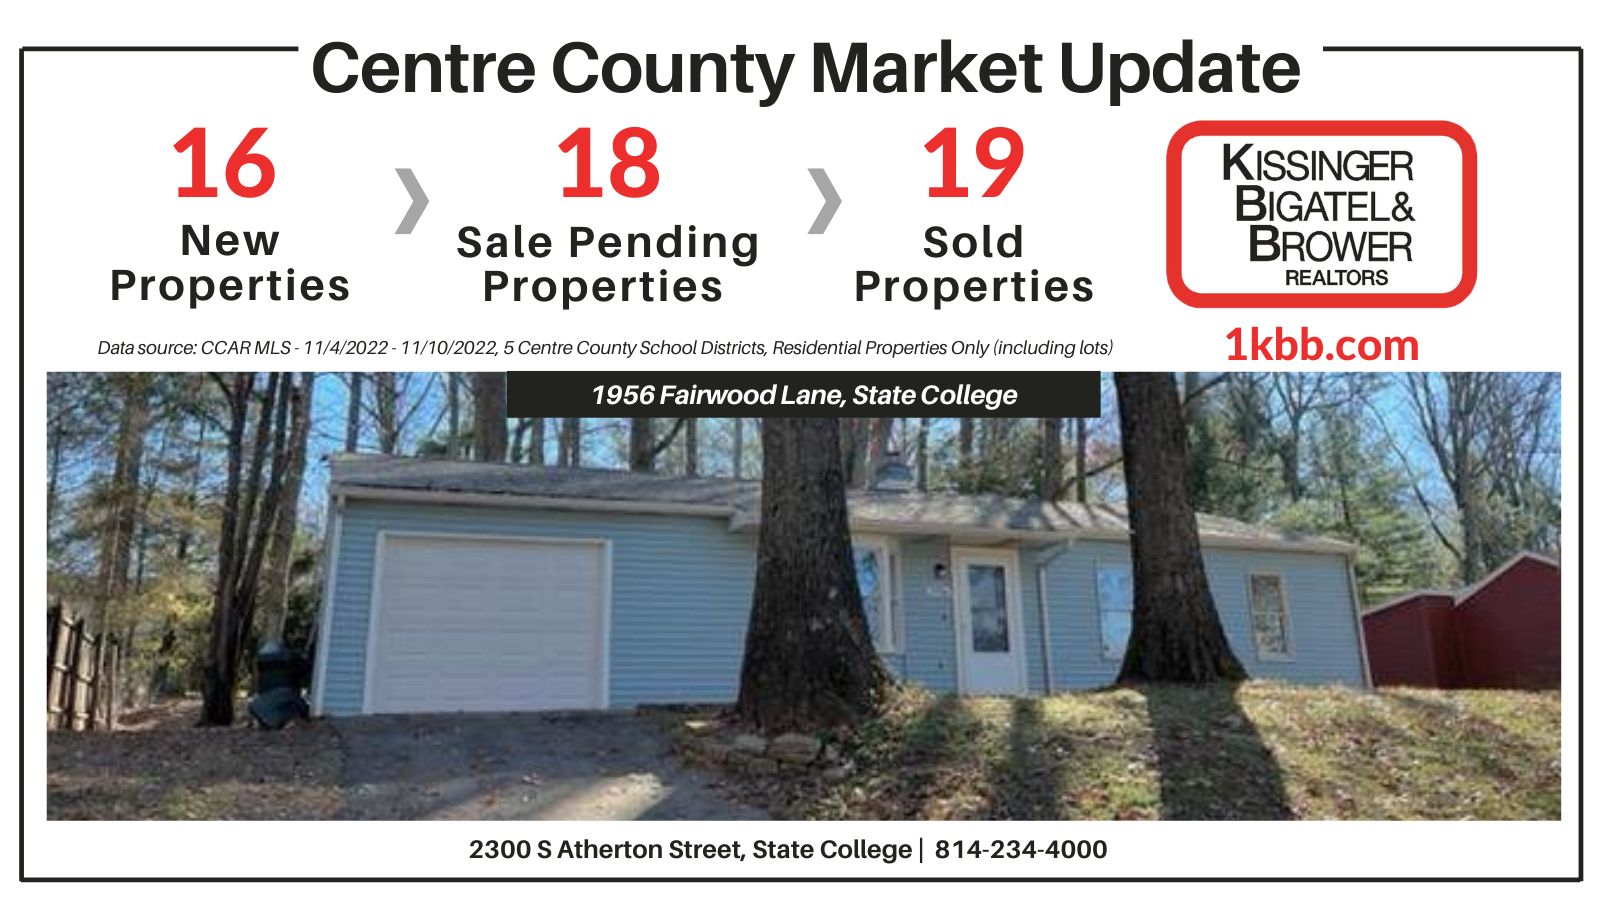 Market Update Report for 11/4-11/10/2022 in Centre County, PA